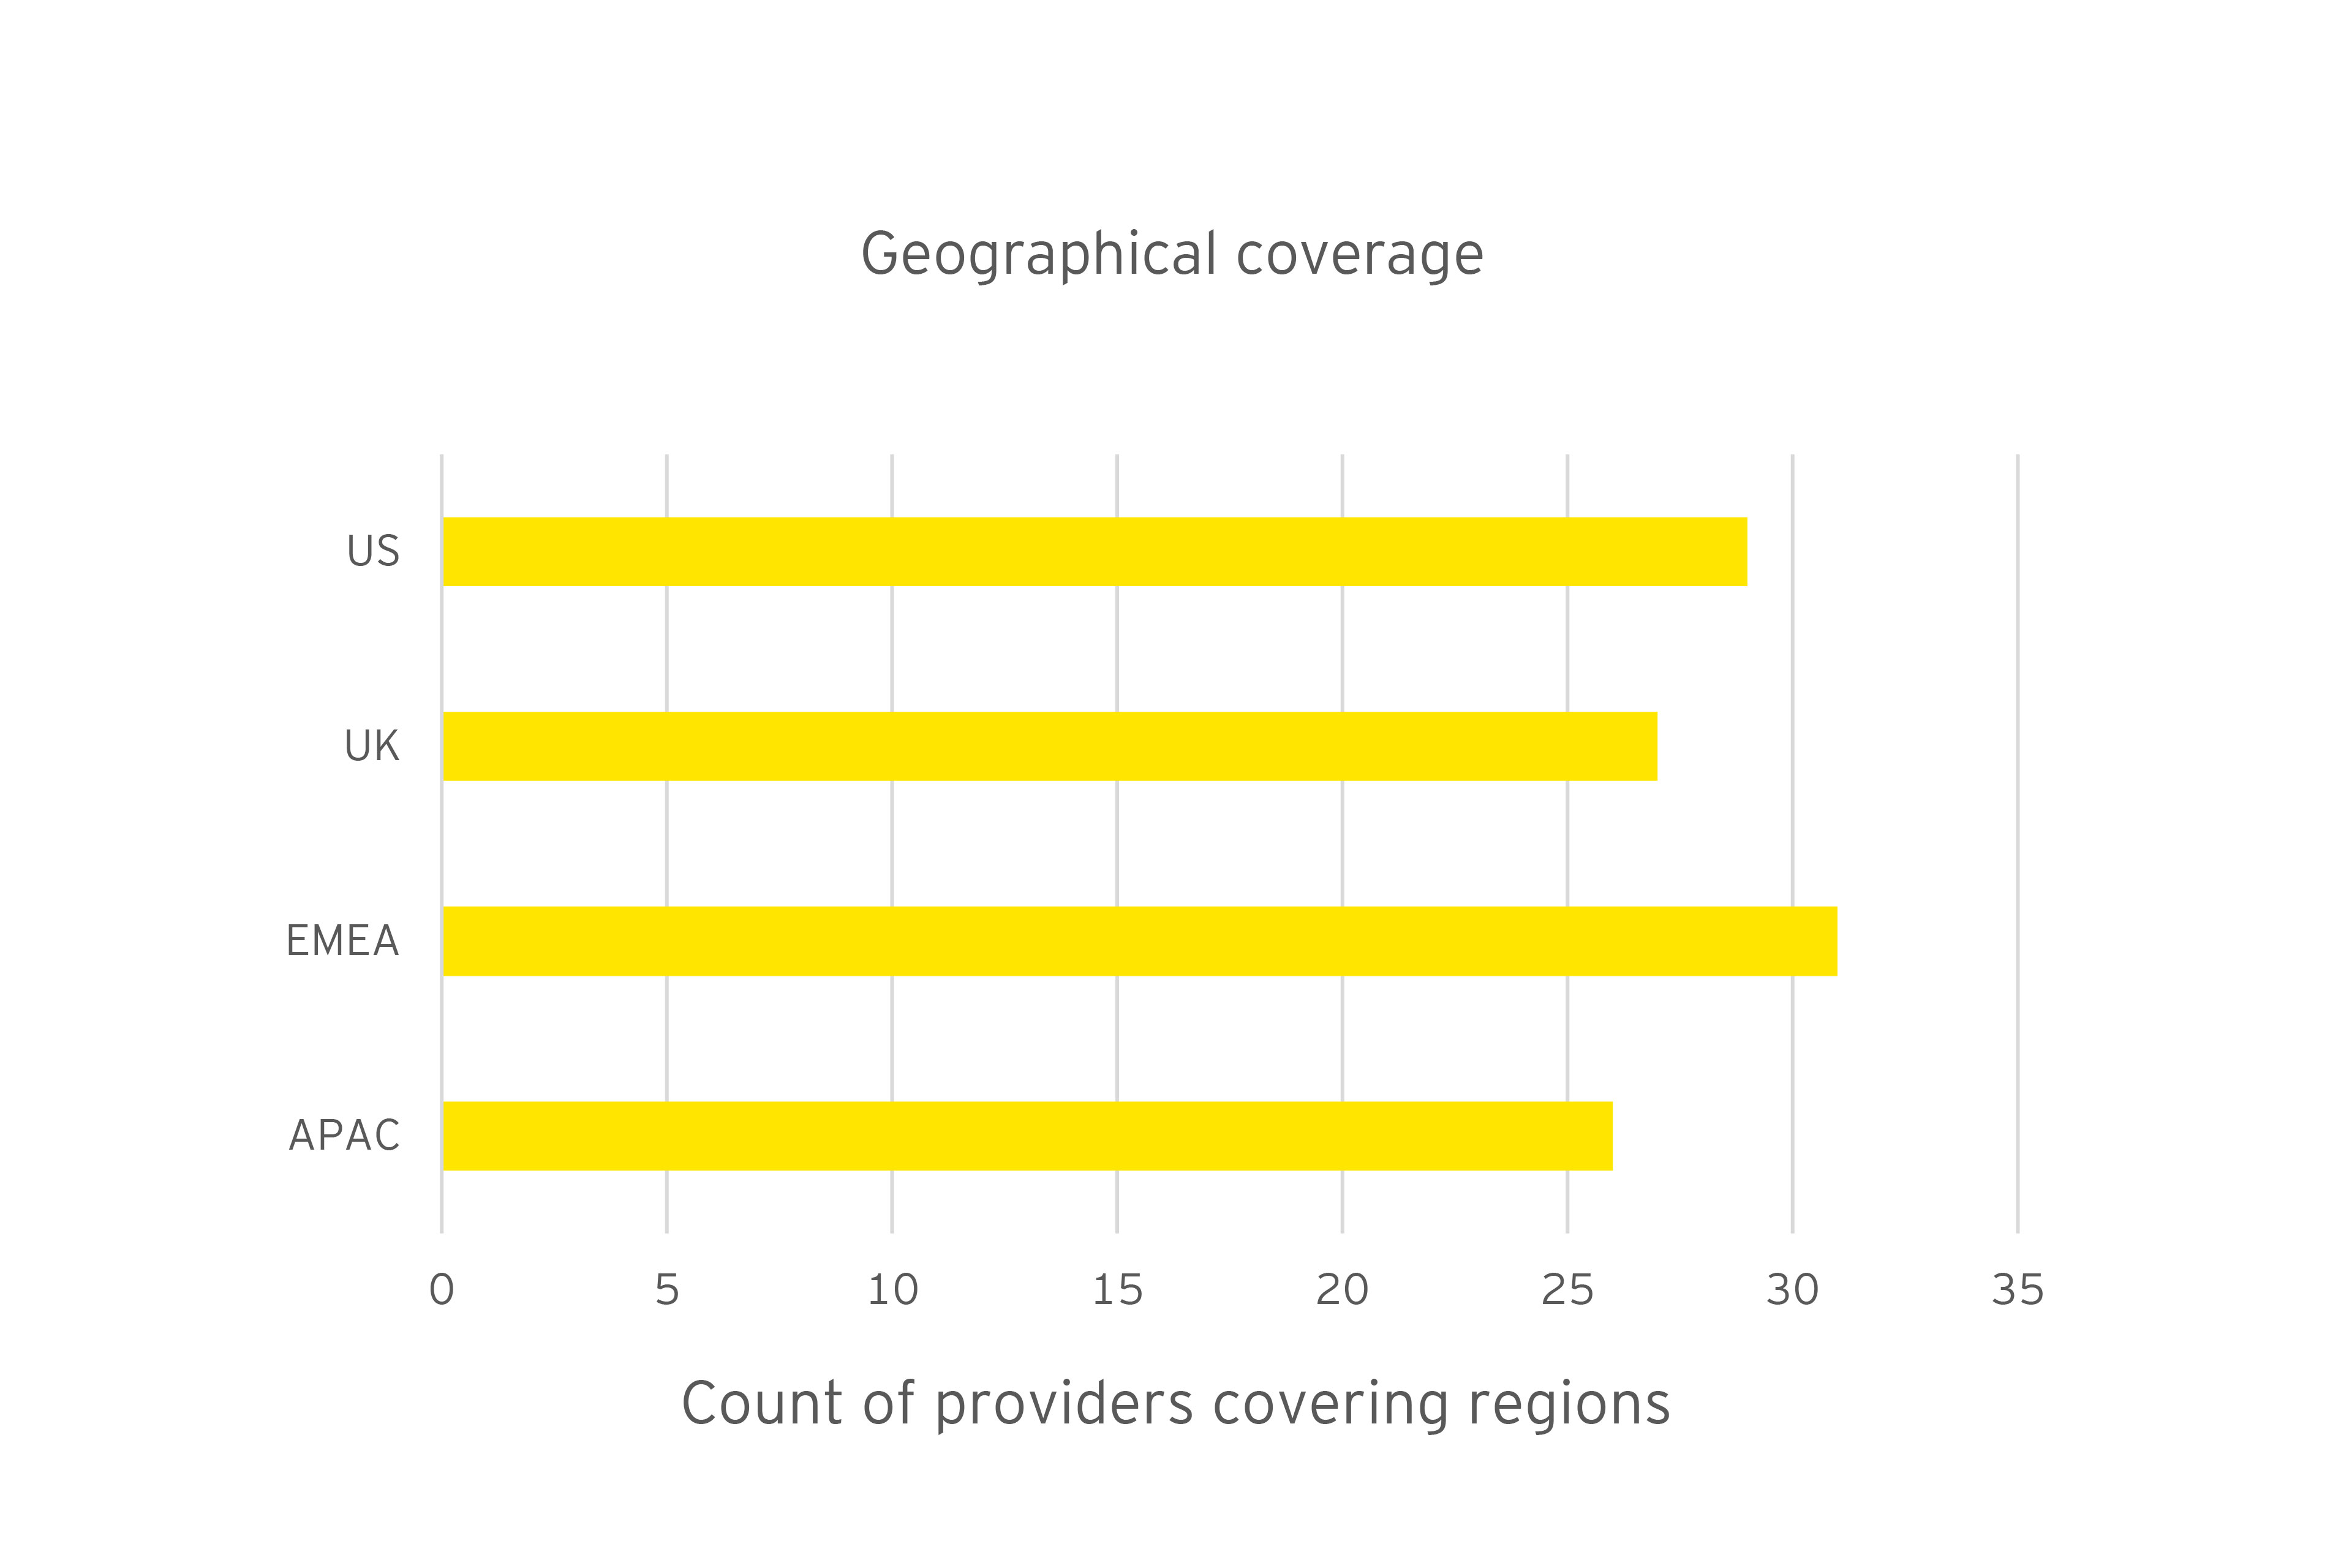 Geographical coverage by region of ESG data providers